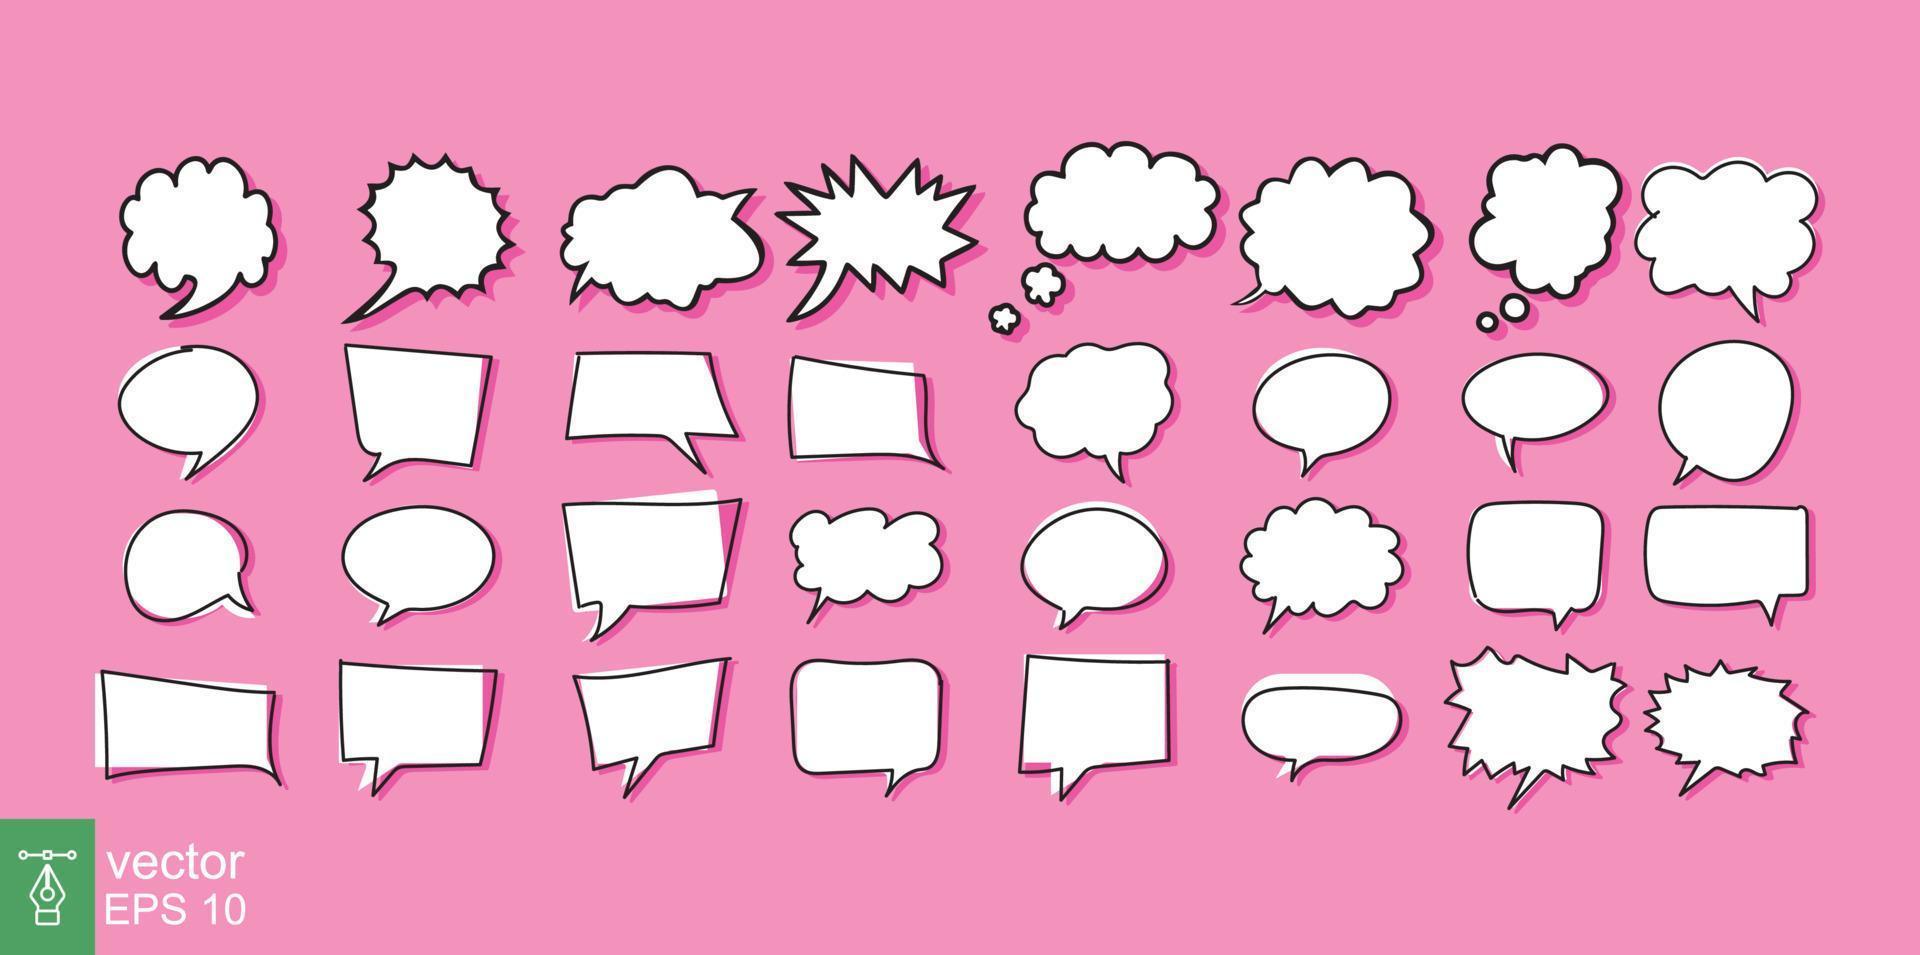 Different cloud cartoon speech bubble icon set. Simple flat style. Hand drawn, doodle, communication concept. Vector illustration collection isolated on pink background. EPS 10.